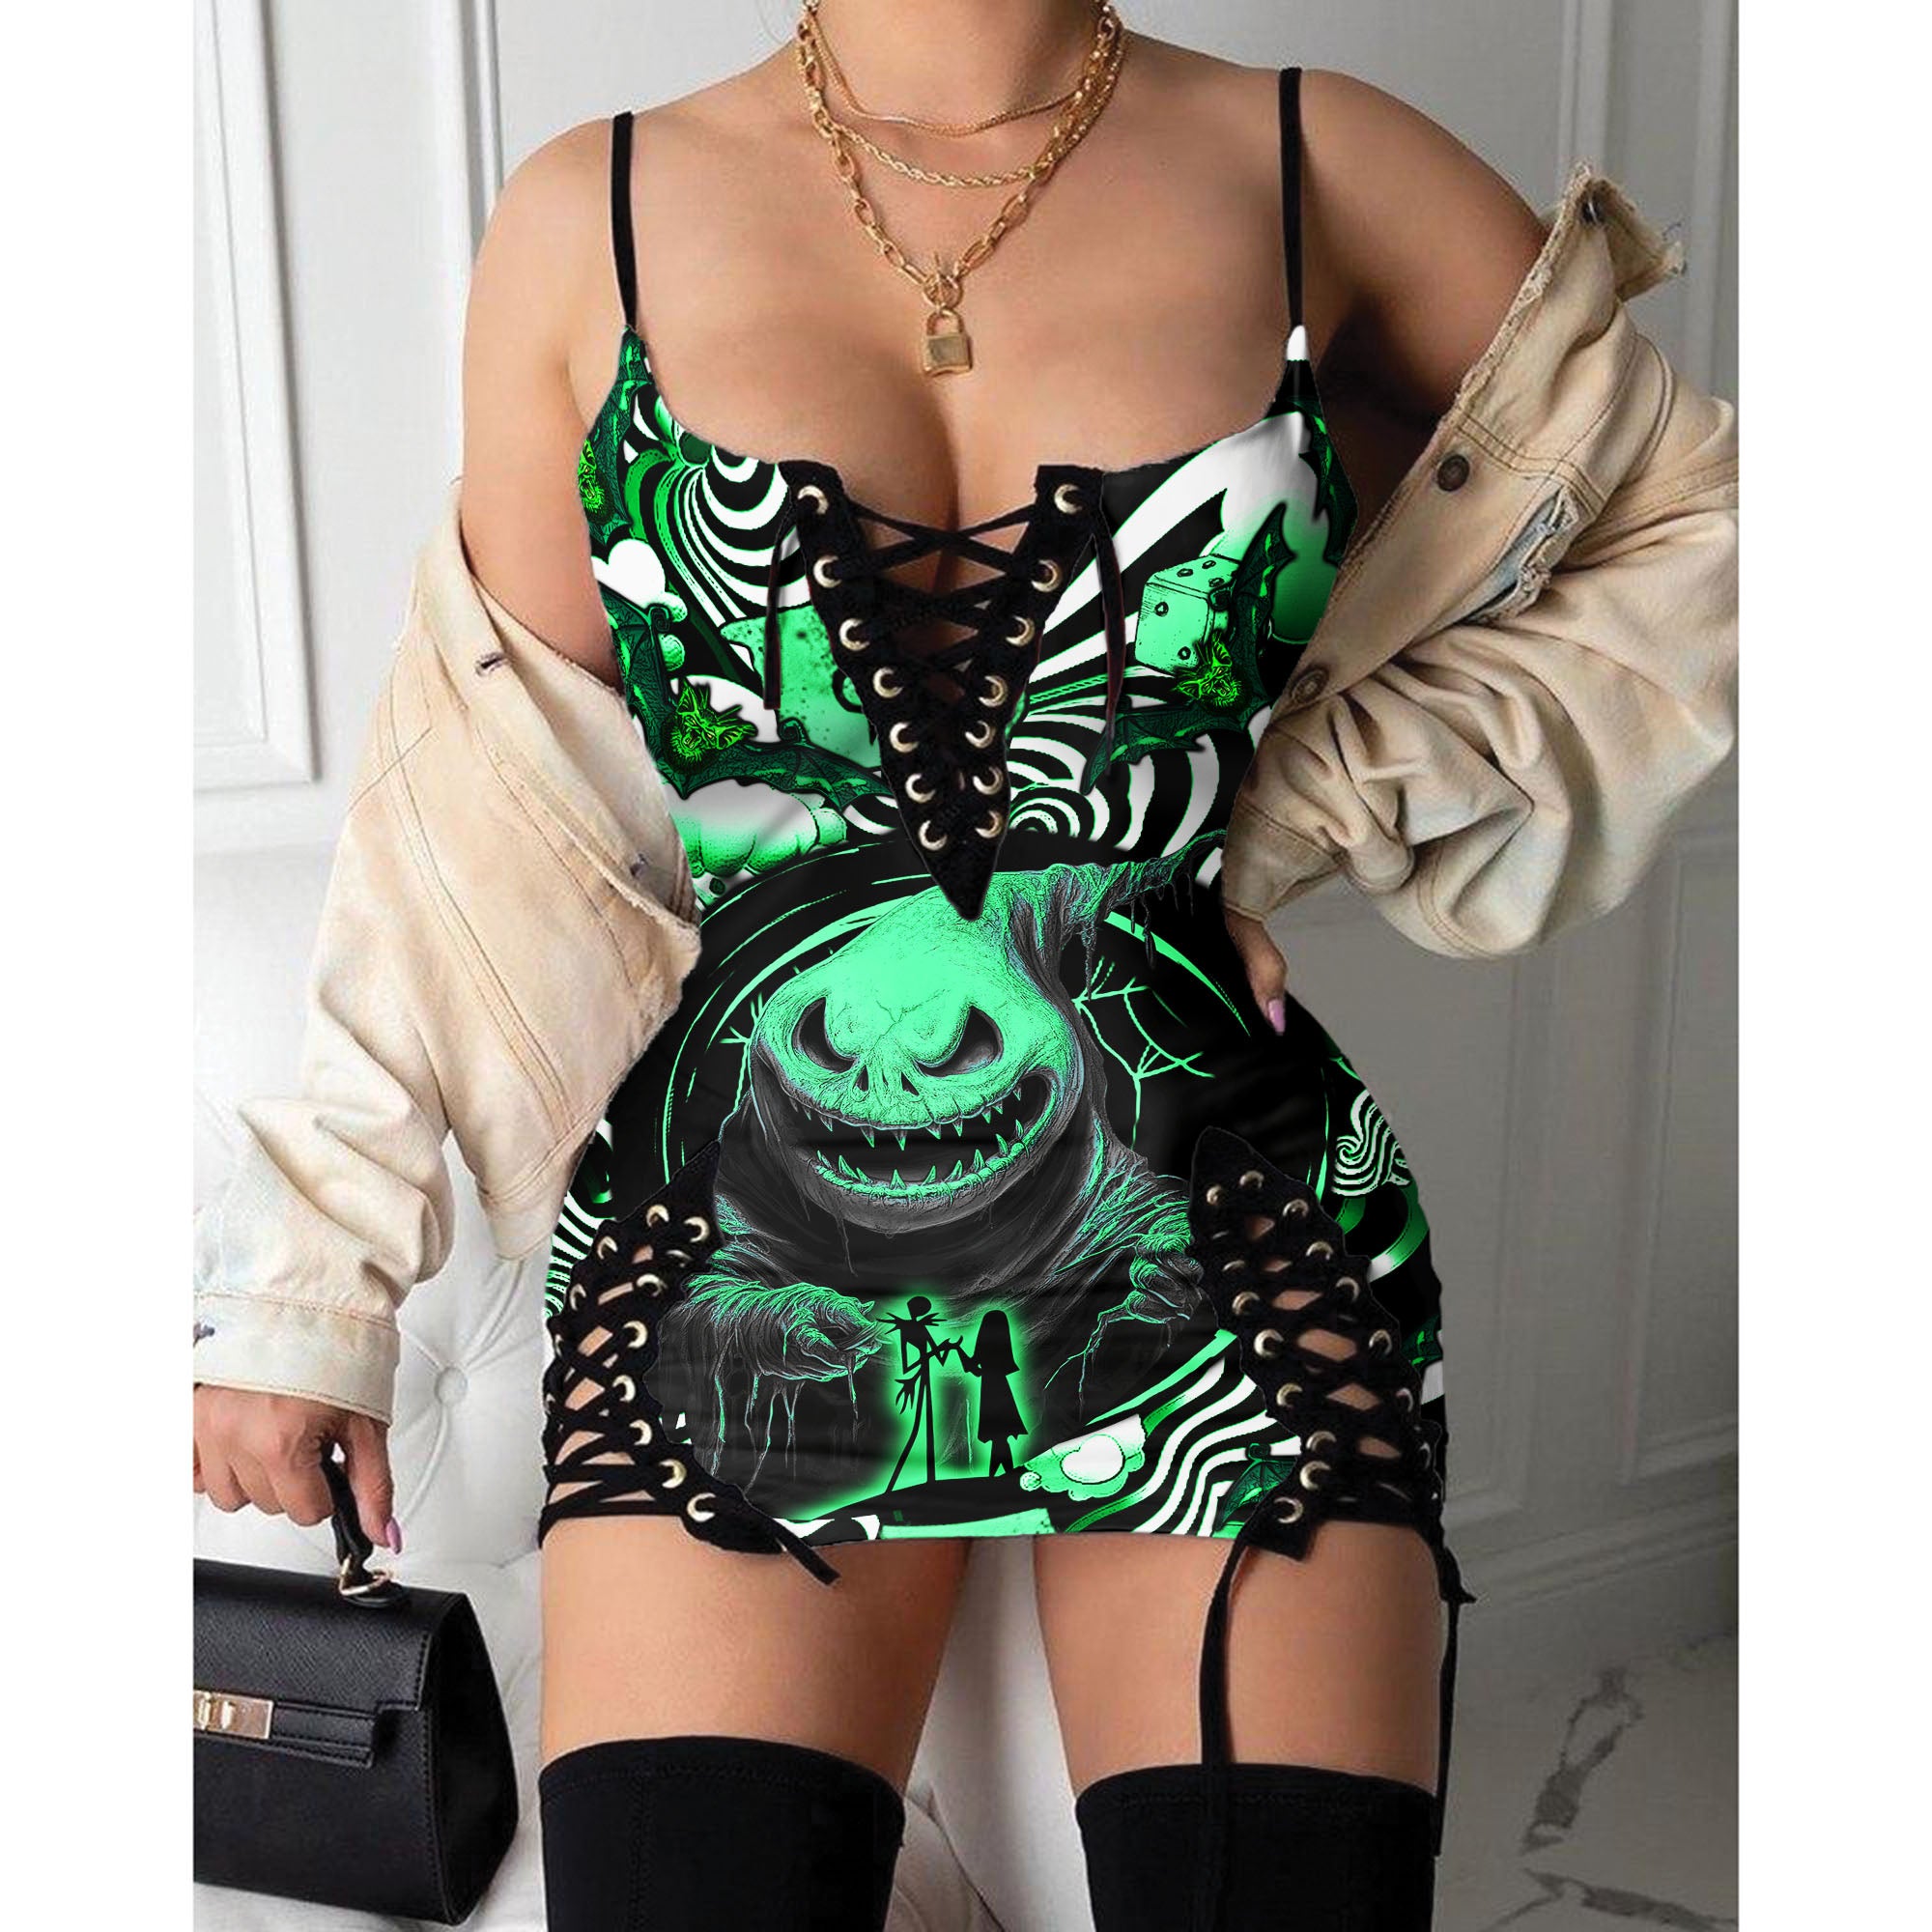 Express your personal style with the Hot Gothic Dress, a timeless piece featuring a unique Green Love Nightmare, perfect for enhancing your daily fashion routine.